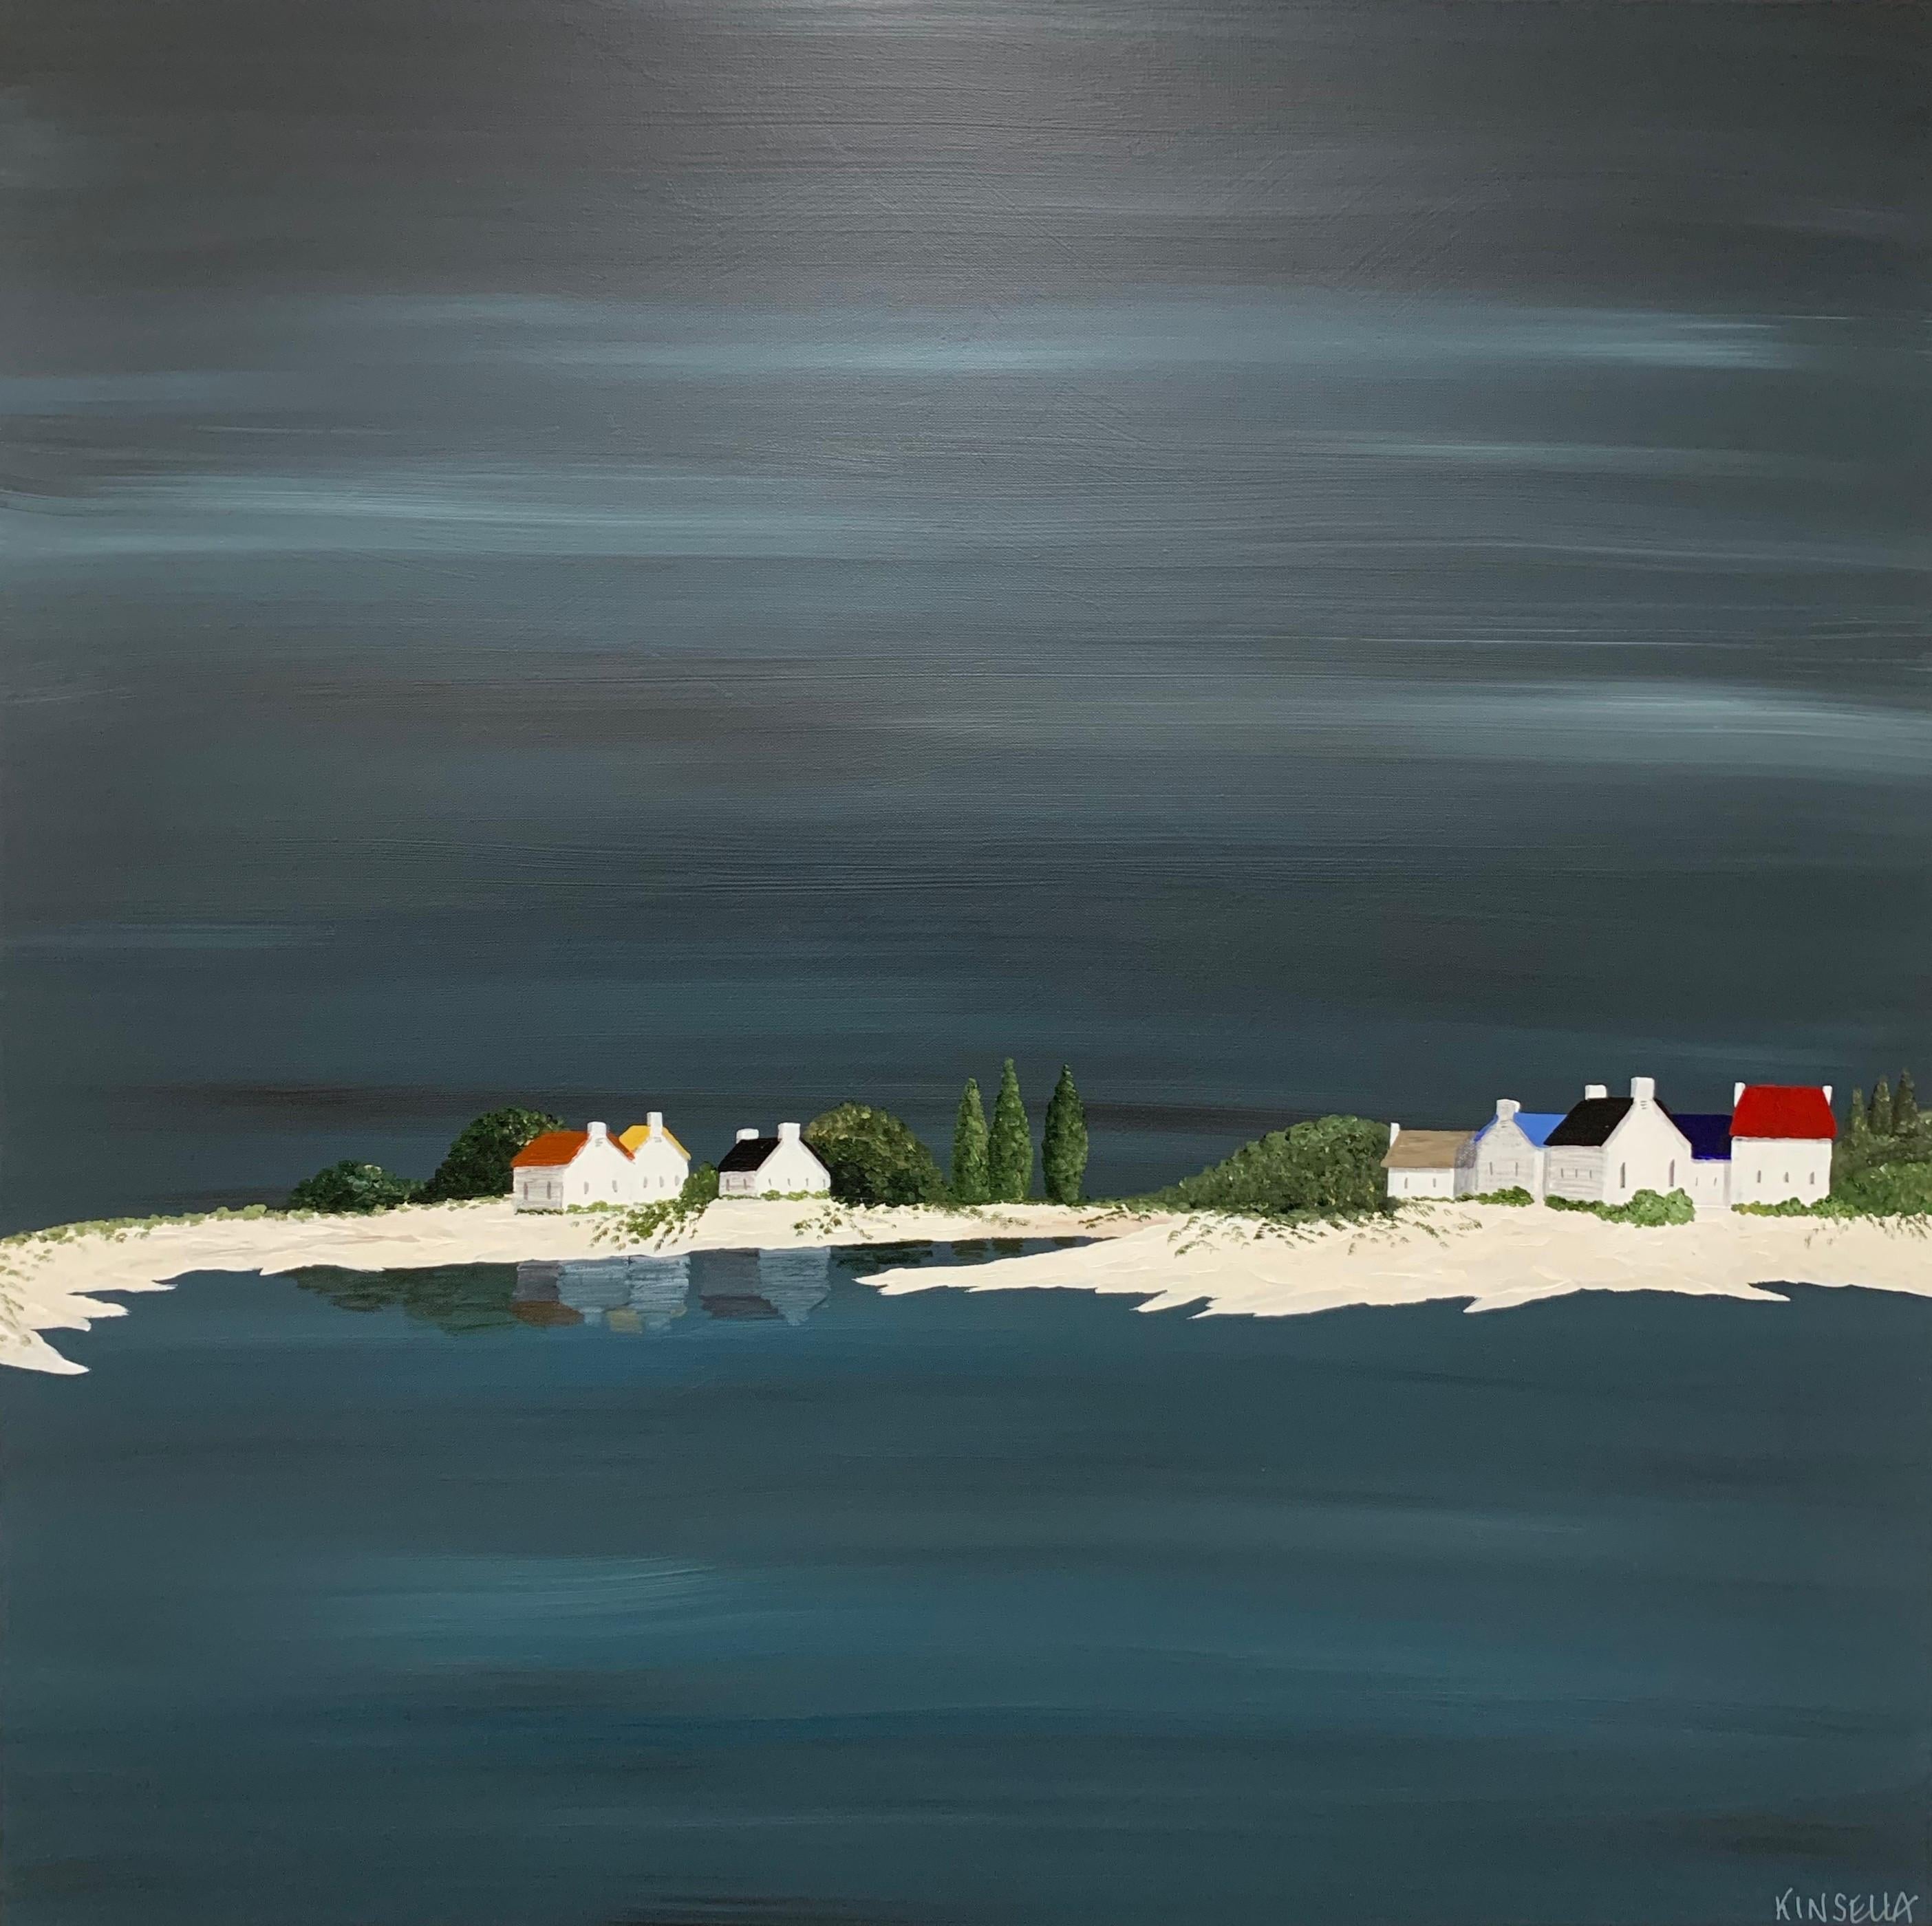 'Tranquil Village' is a medium size contemporary acrylic on canvas coastal painting of square format created by American artist Susan Kinsella in 2019. Featuring a dark palette mostly made of grey, black, blue, red, green and beige tones, this